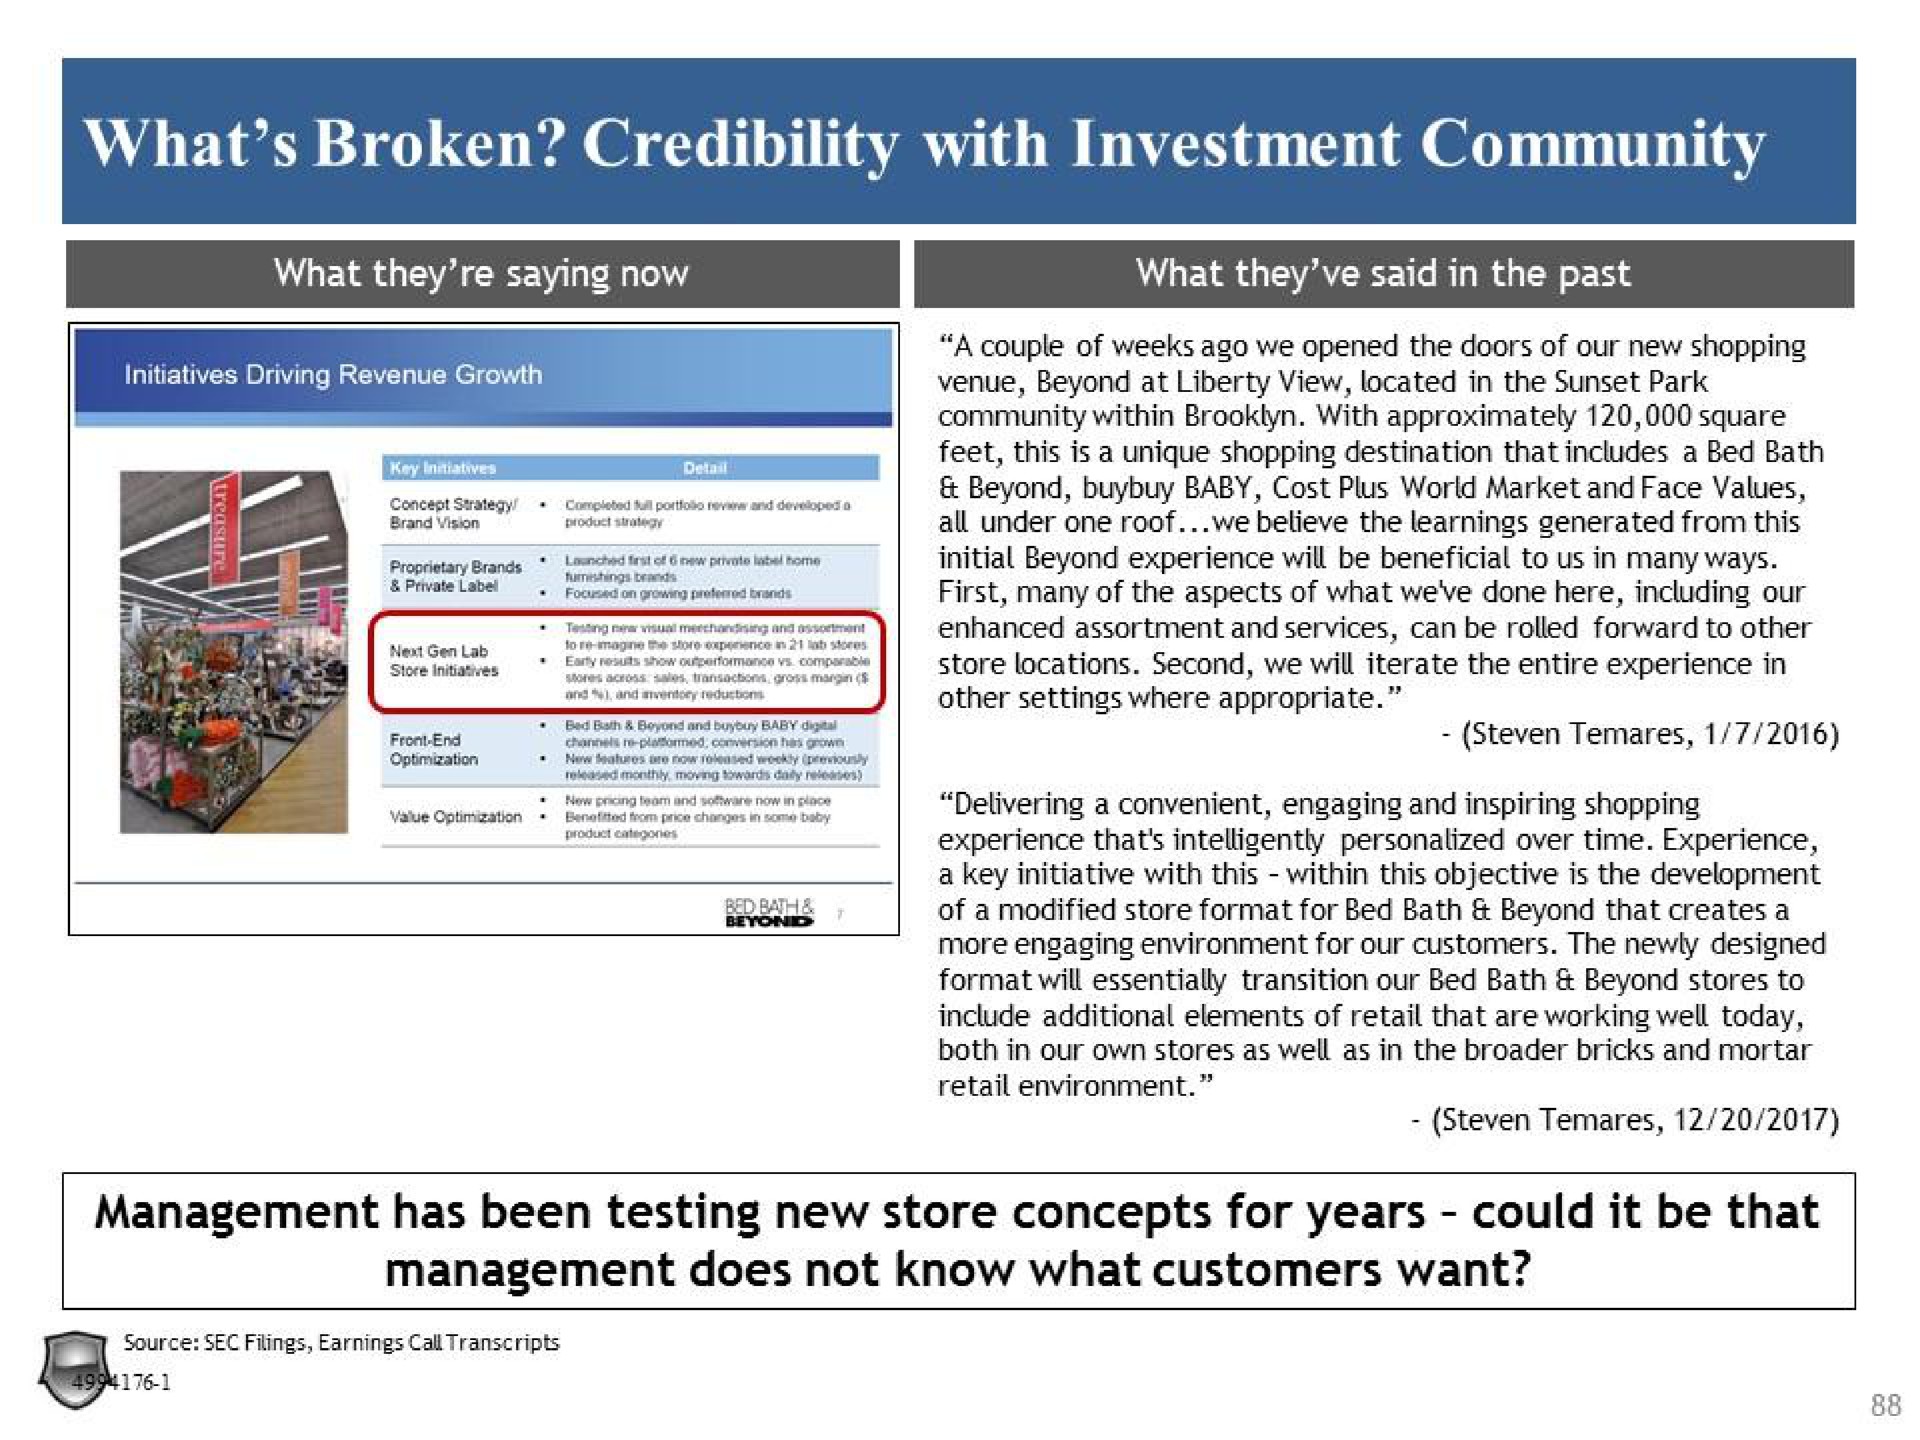 what broken credibility with investment community management has been testing new store concepts for years could it be that management does not know what customers want | Legion Partners